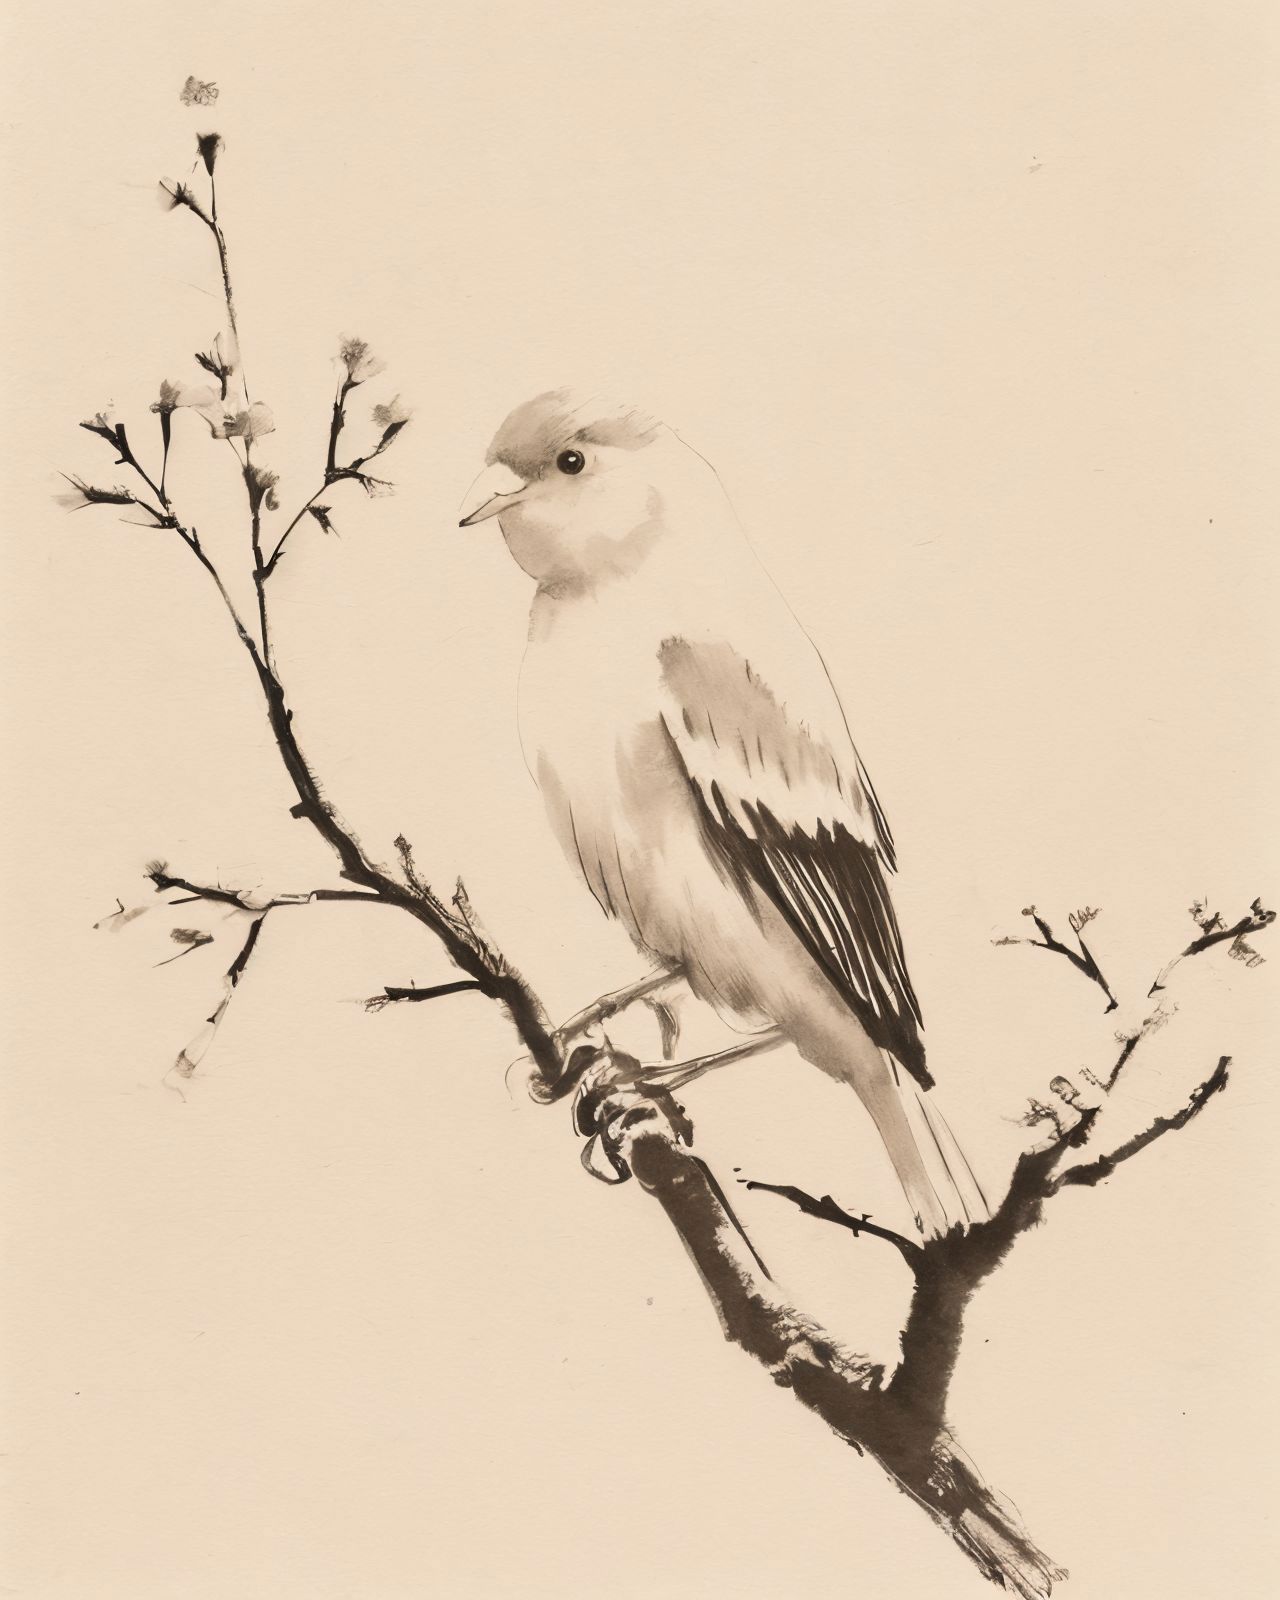 Black and White Drawing of a Bird Perched on a Branch